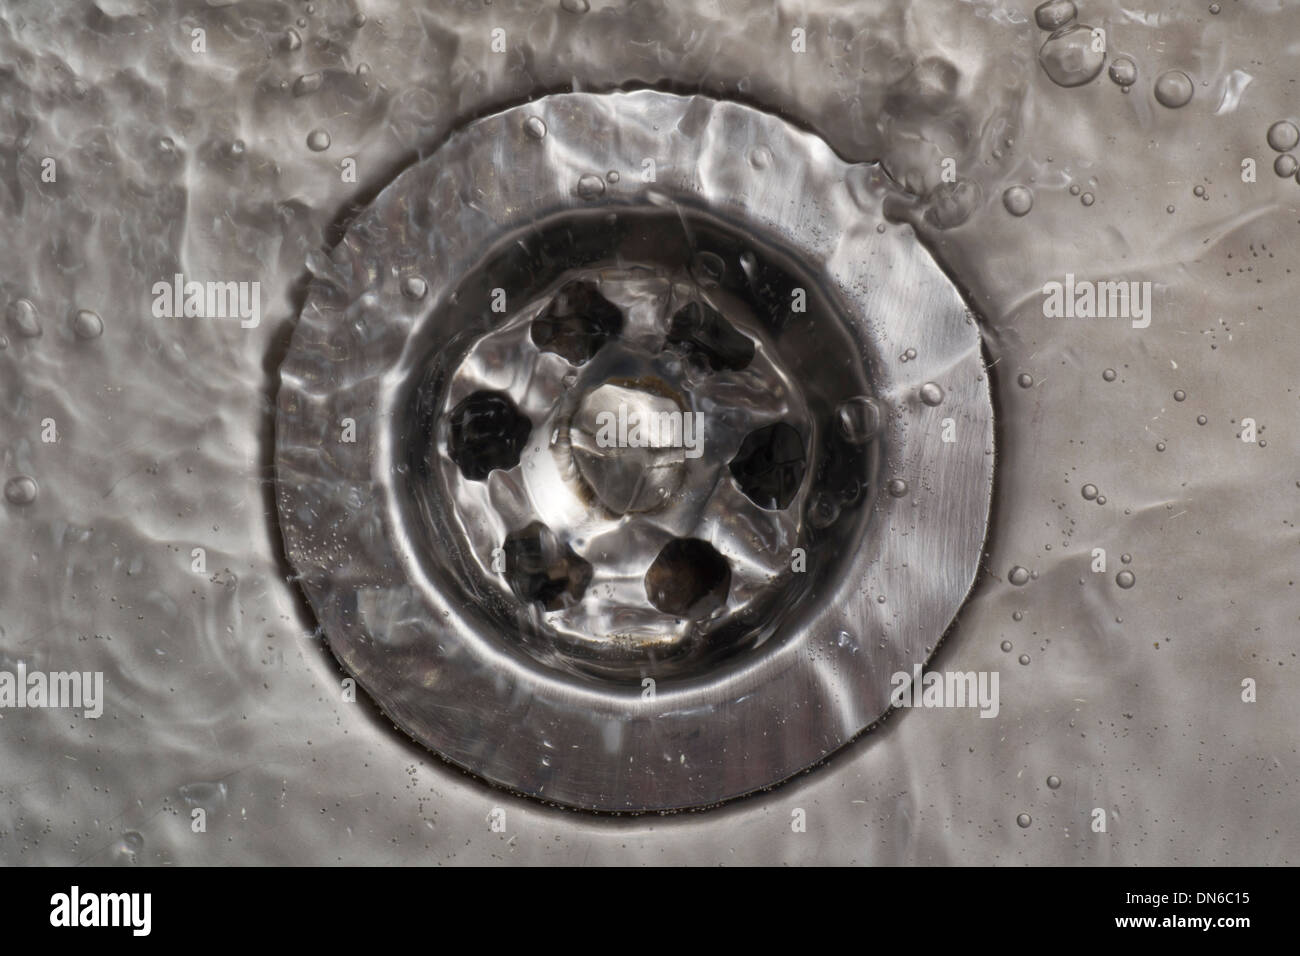 Close up of sink with water drops Stock Photo